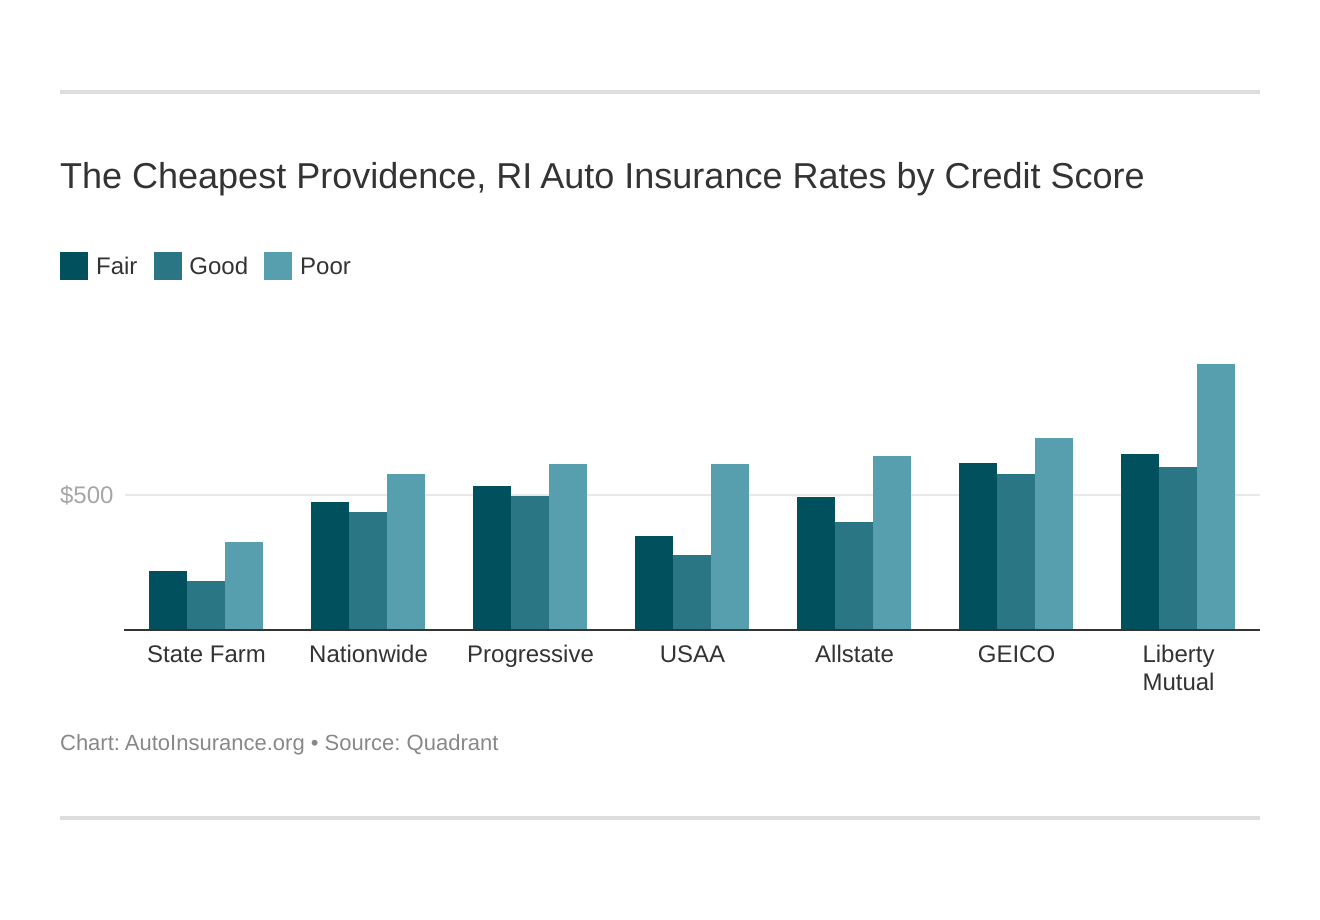 The Cheapest Providence, RI Auto Insurance Rates by Credit Score